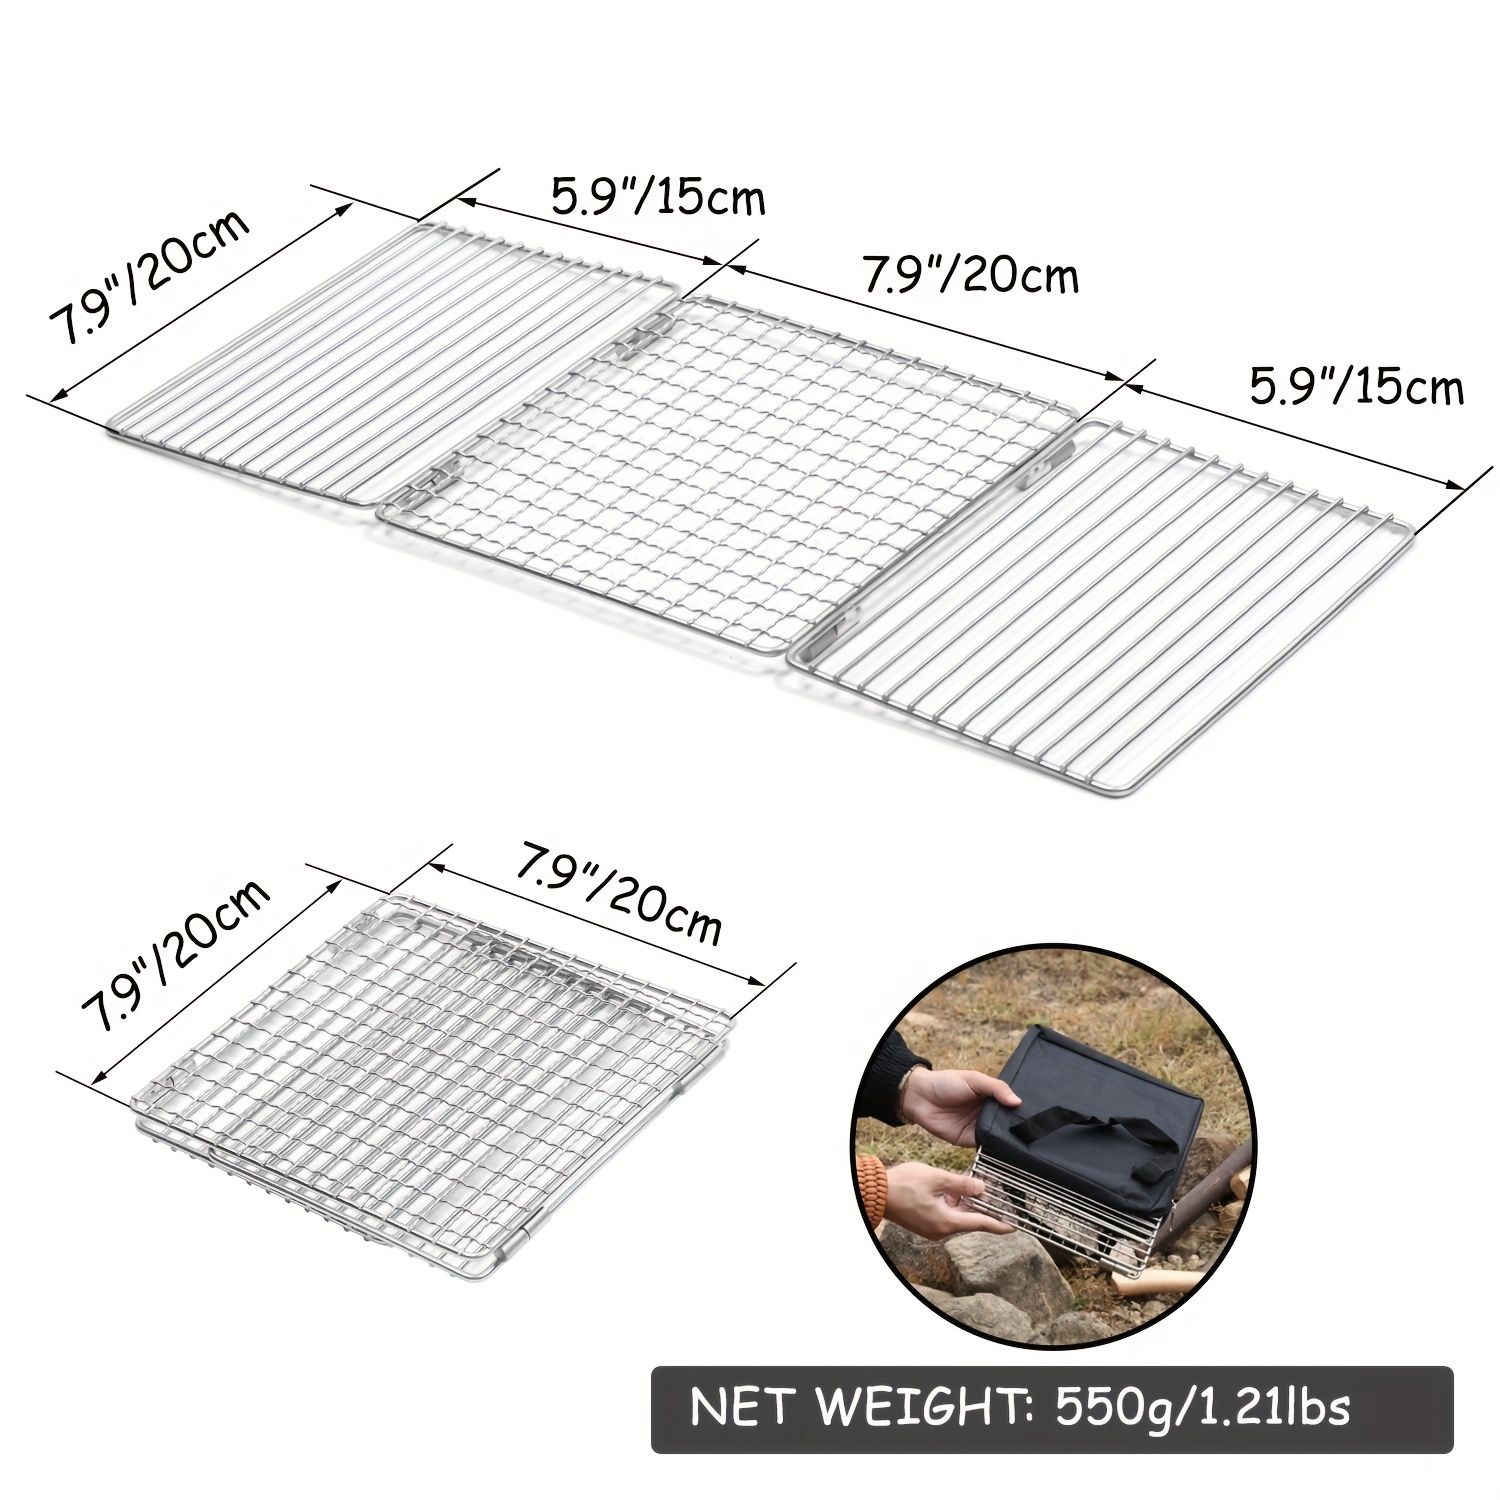 Stainless Steel Rectangle BBQ Grill Outdoor Camp Barbecue Net Rack